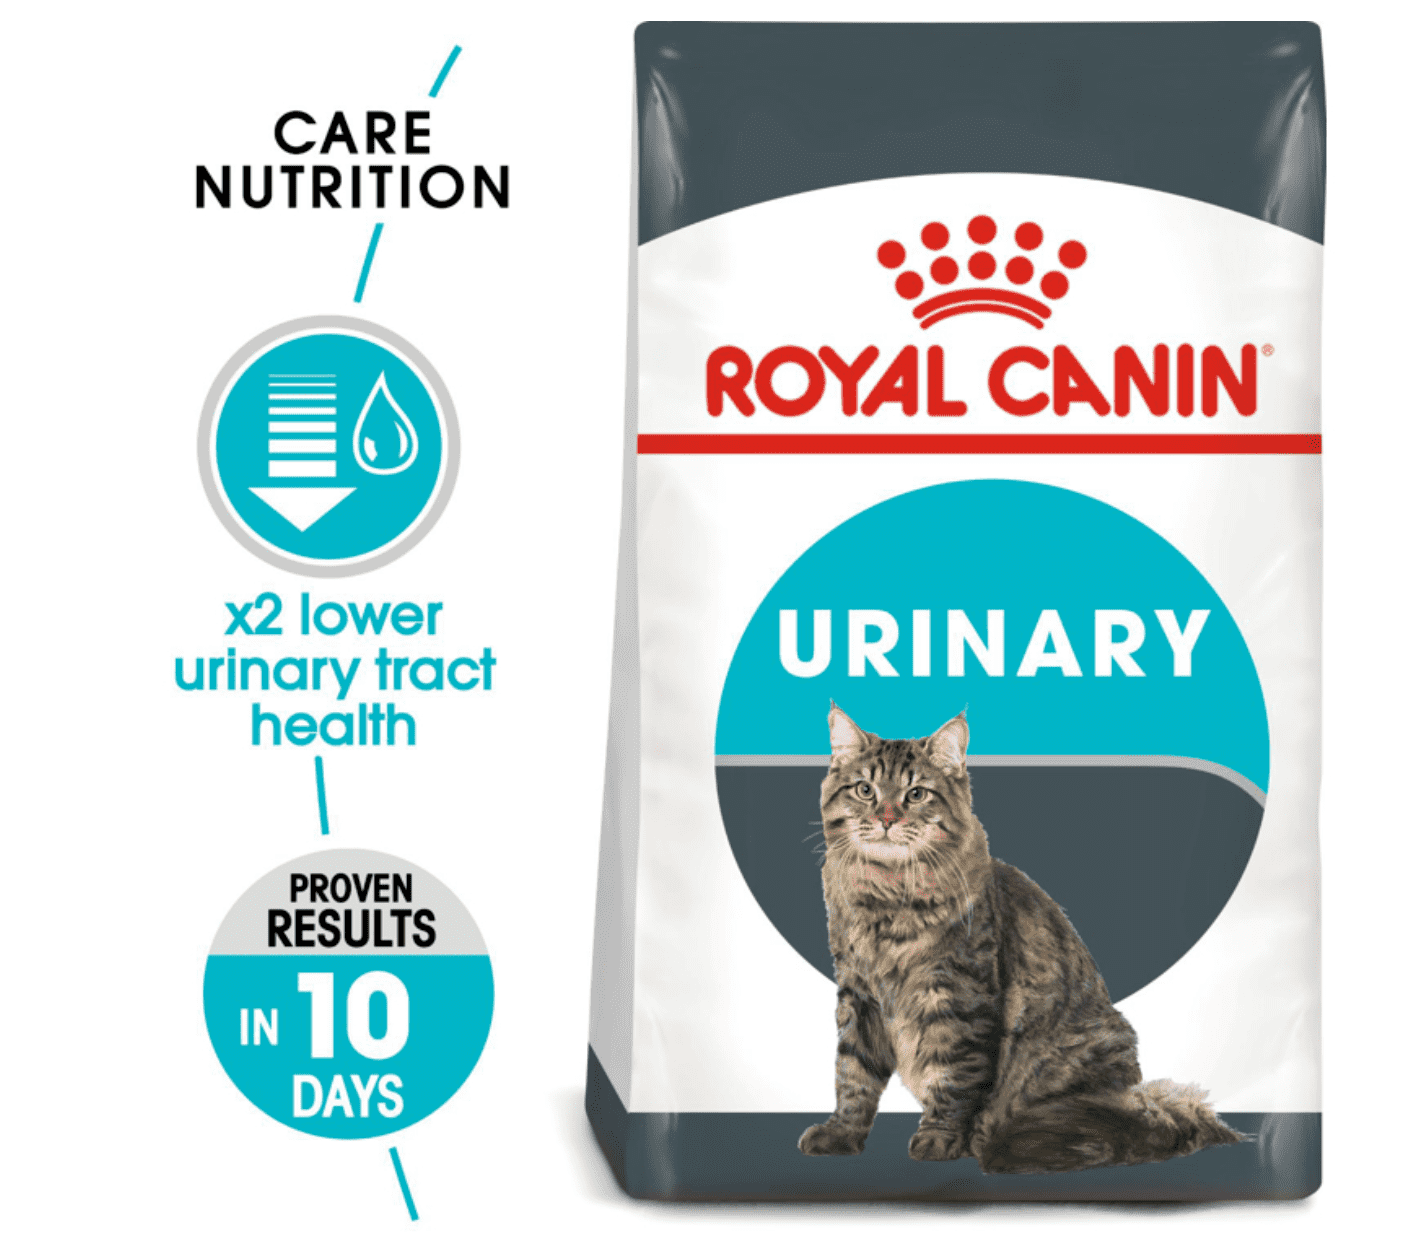 Royal Canin CARE kg